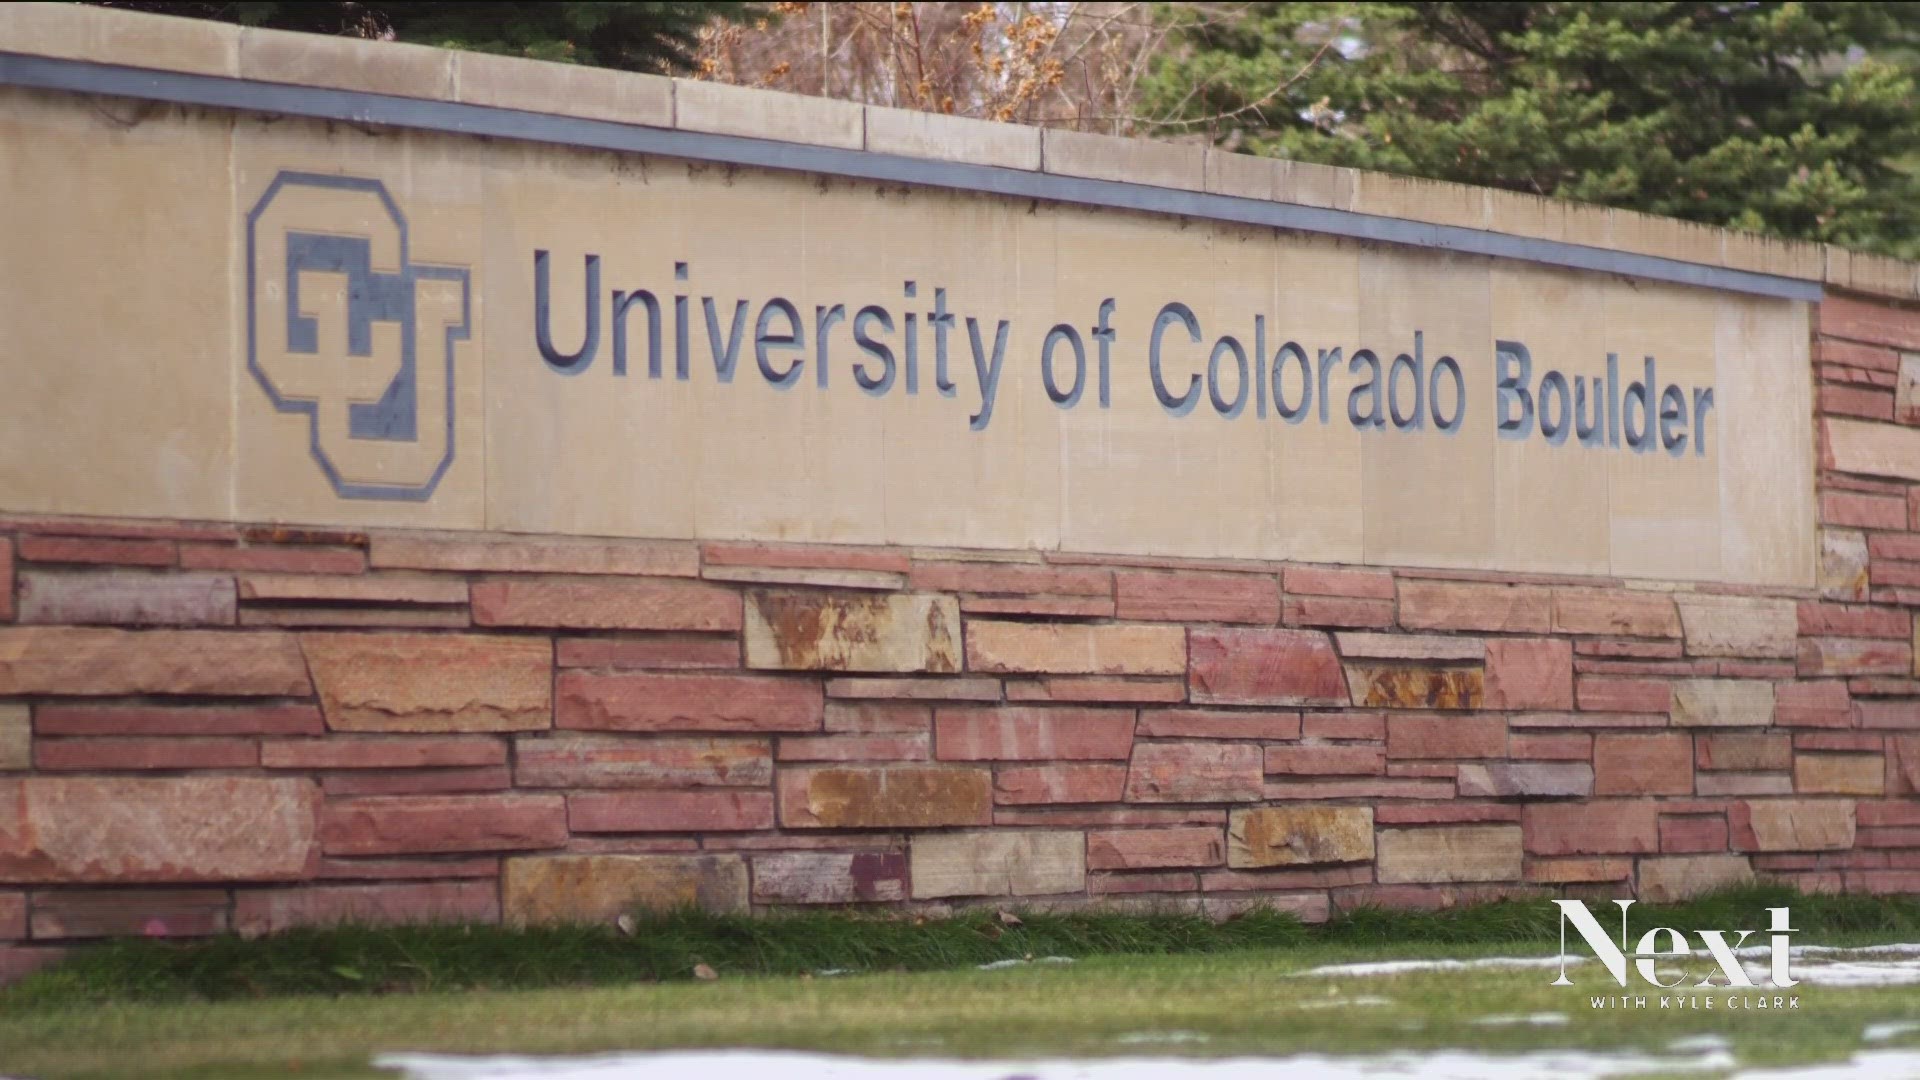 The free speech debate happening at the University of Colorado involves what faculty can publish on the public university's website.